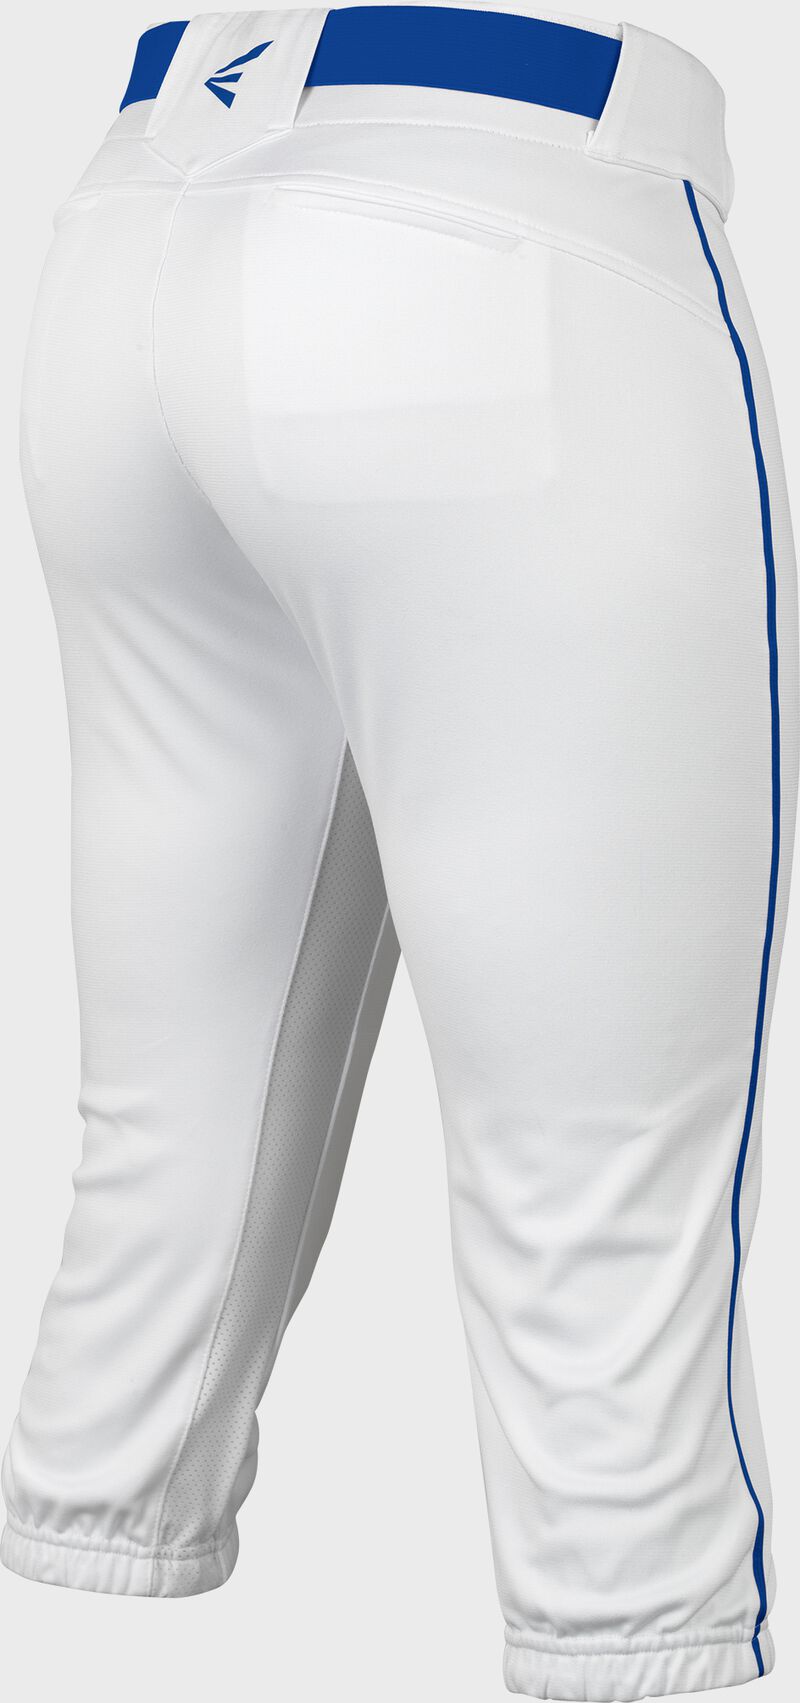 Easton Prowess Softball Pant Women's Piped WHITE/ROYAL  XXL loading=